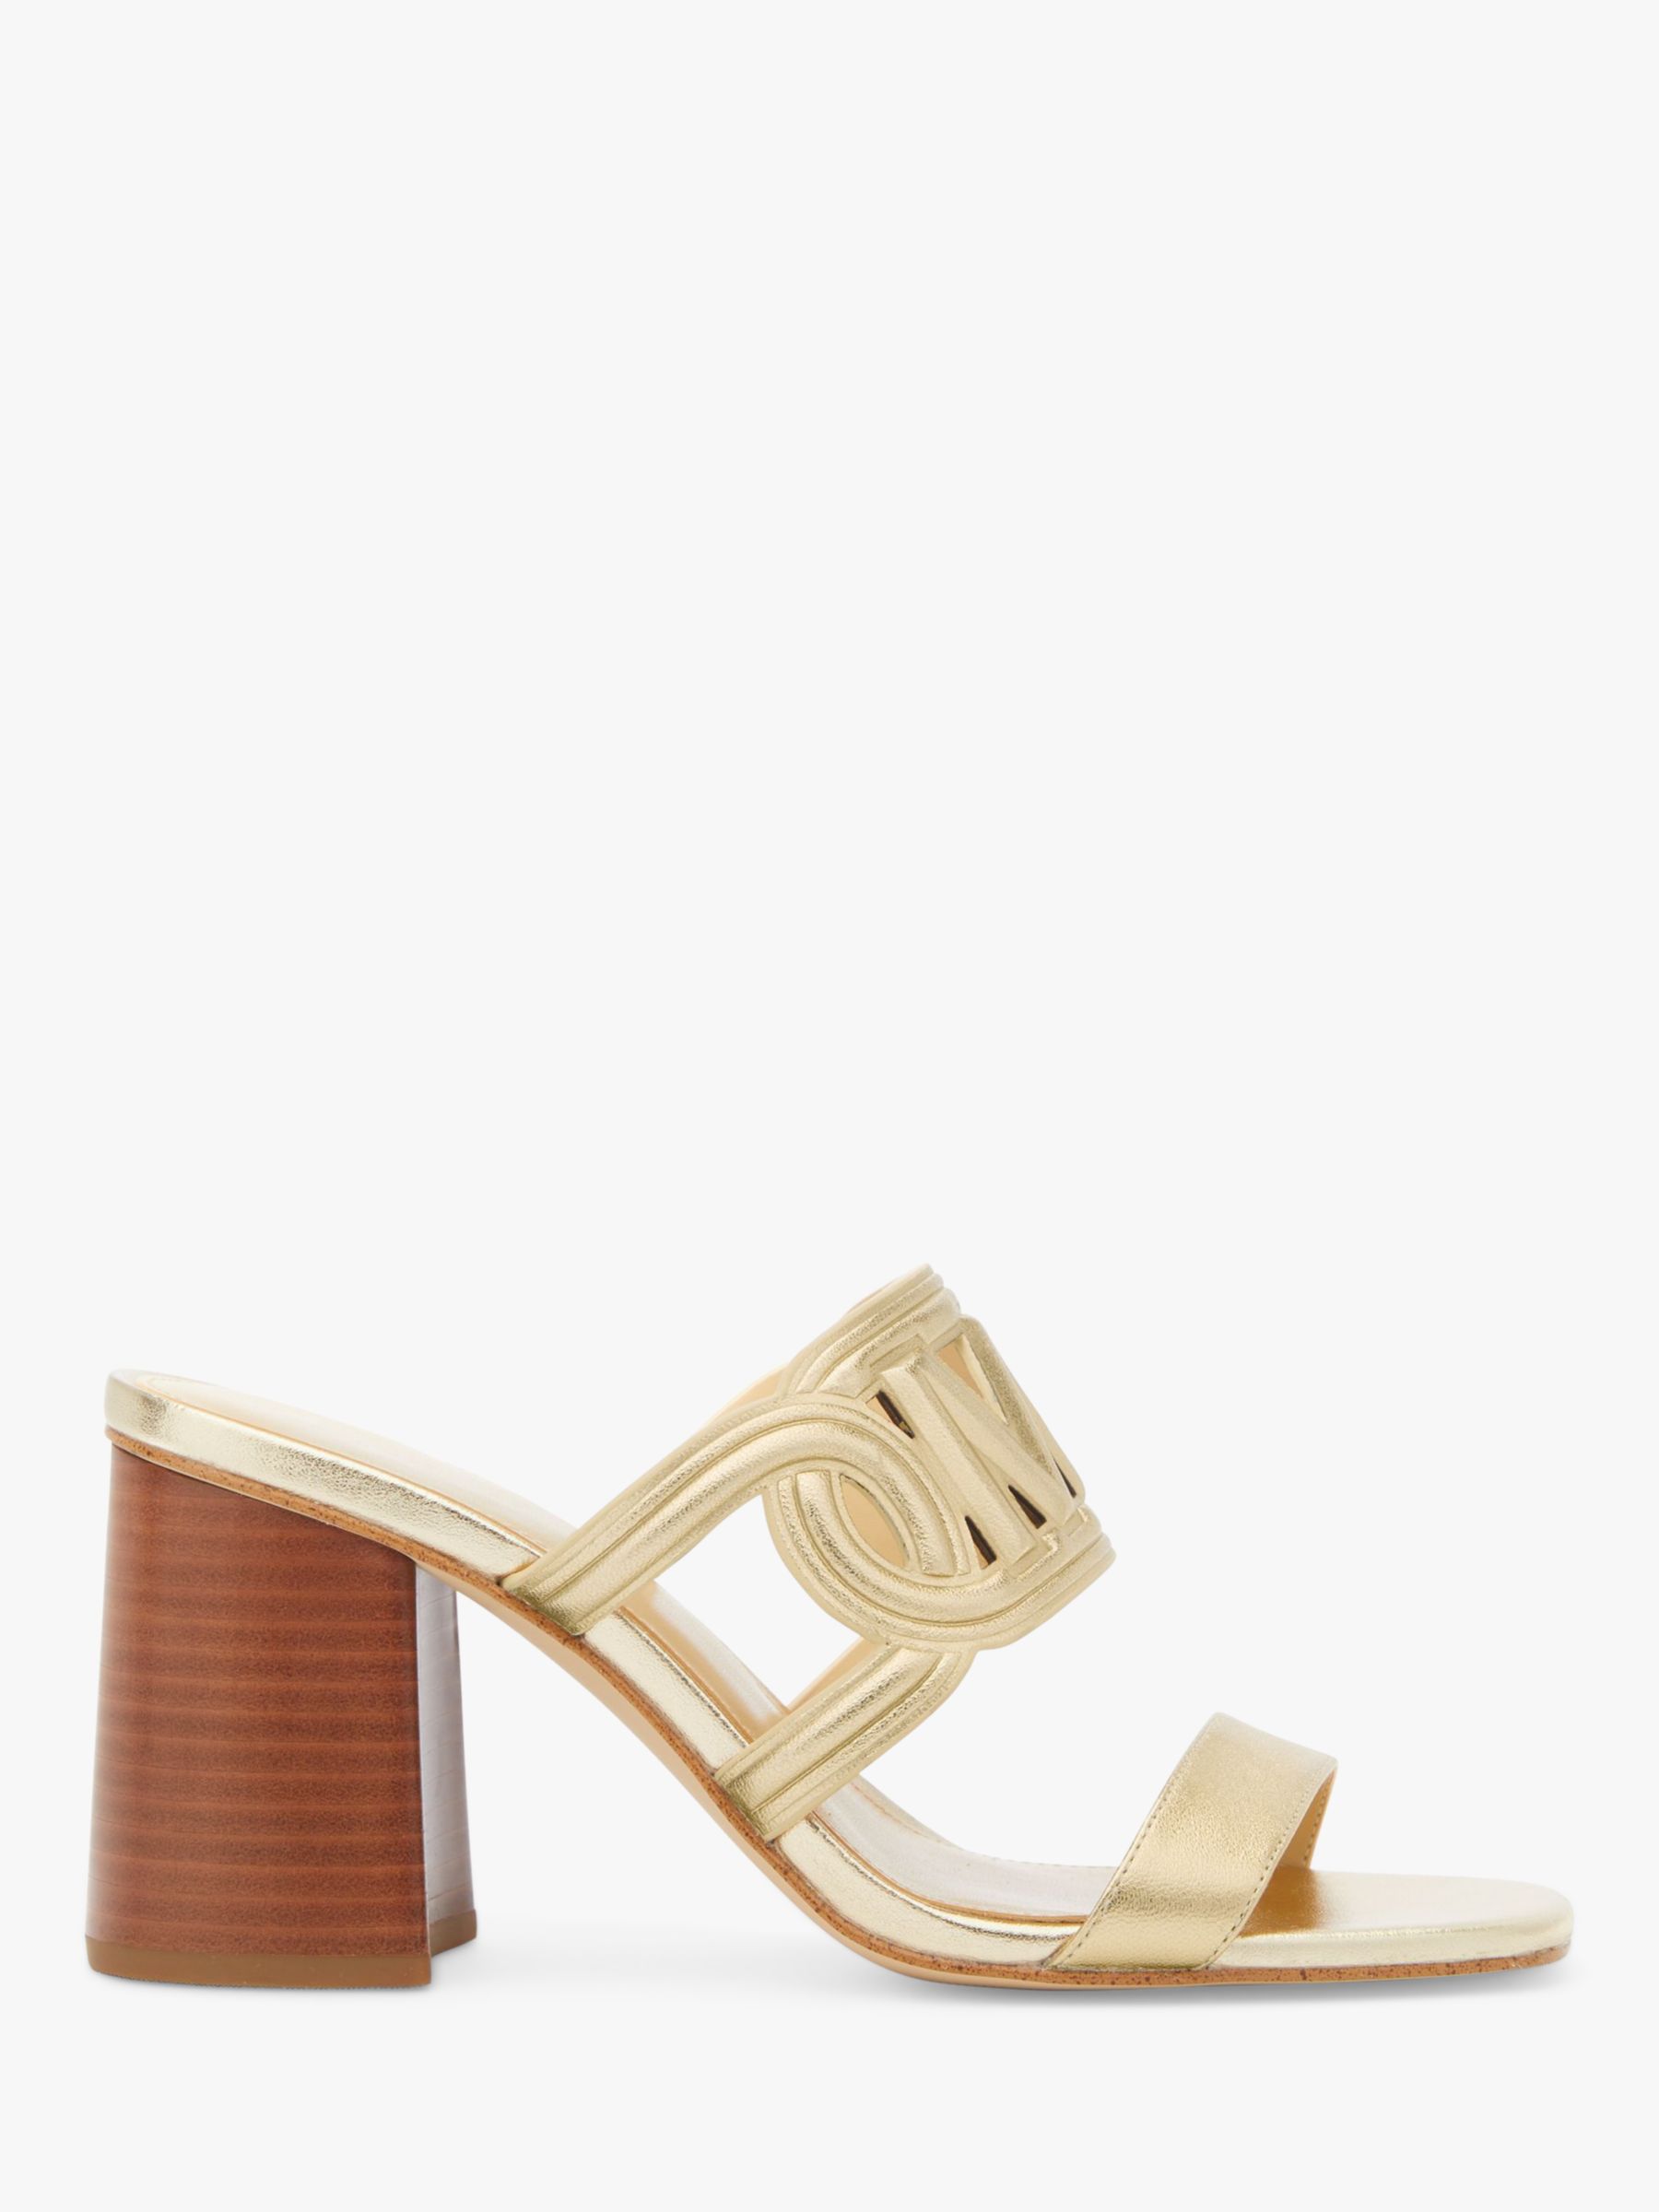 Buy MICHAEL Michael Kors Almda Leather Heeled Mule Sandals, Pale Gold Online at johnlewis.com